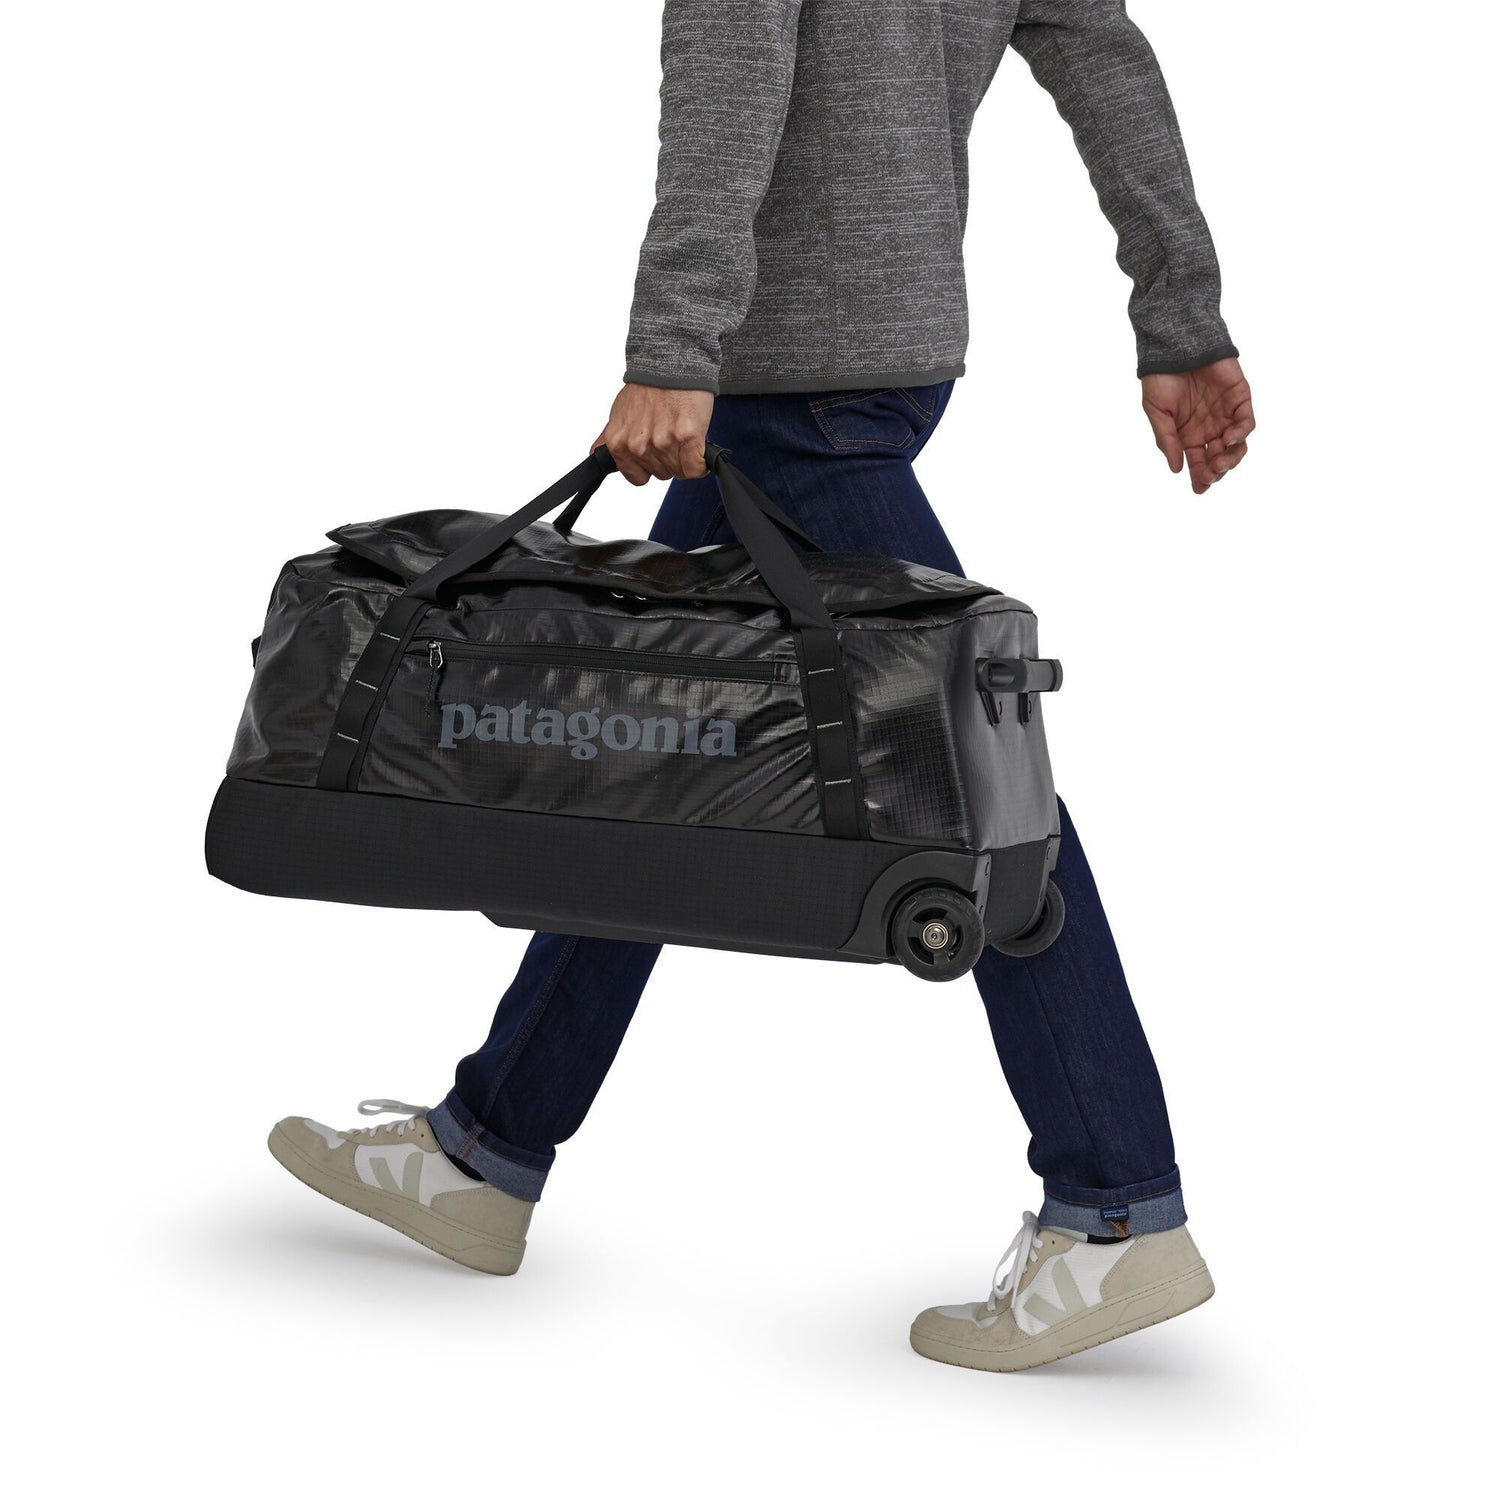 Patagonia - Black Hole Wheeled Duffel Bag 70L - Recycled Polyester - Weekendbee - sustainable sportswear